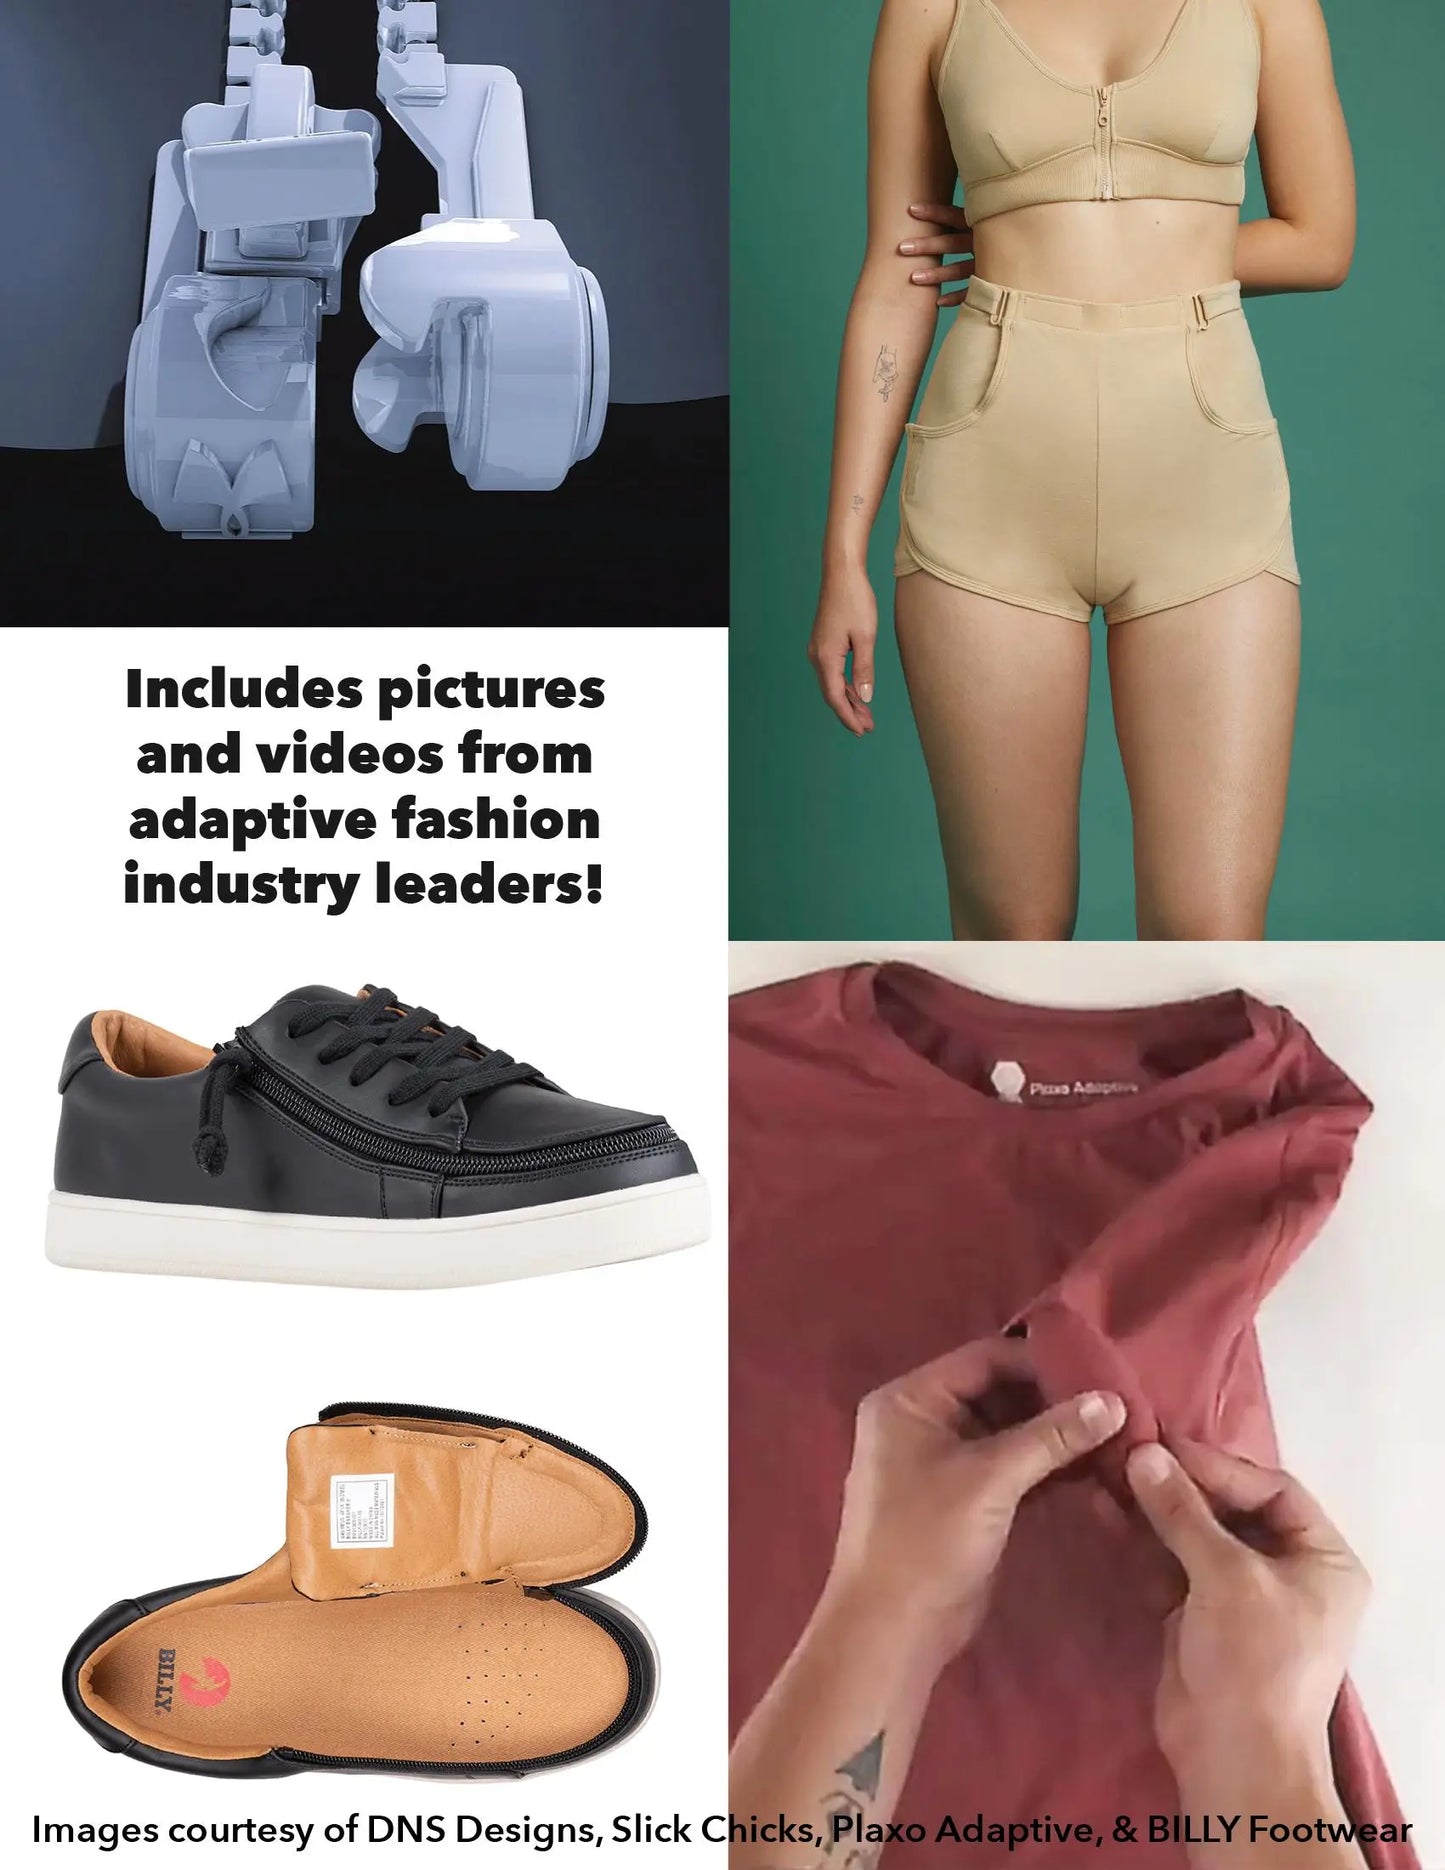 Collage of images that are included in All About Adaptive, provided by adaptive fashion clothing companies DNS Designs, Slick Chicks, Plaxo Adaptive, and BILLY Footwear.